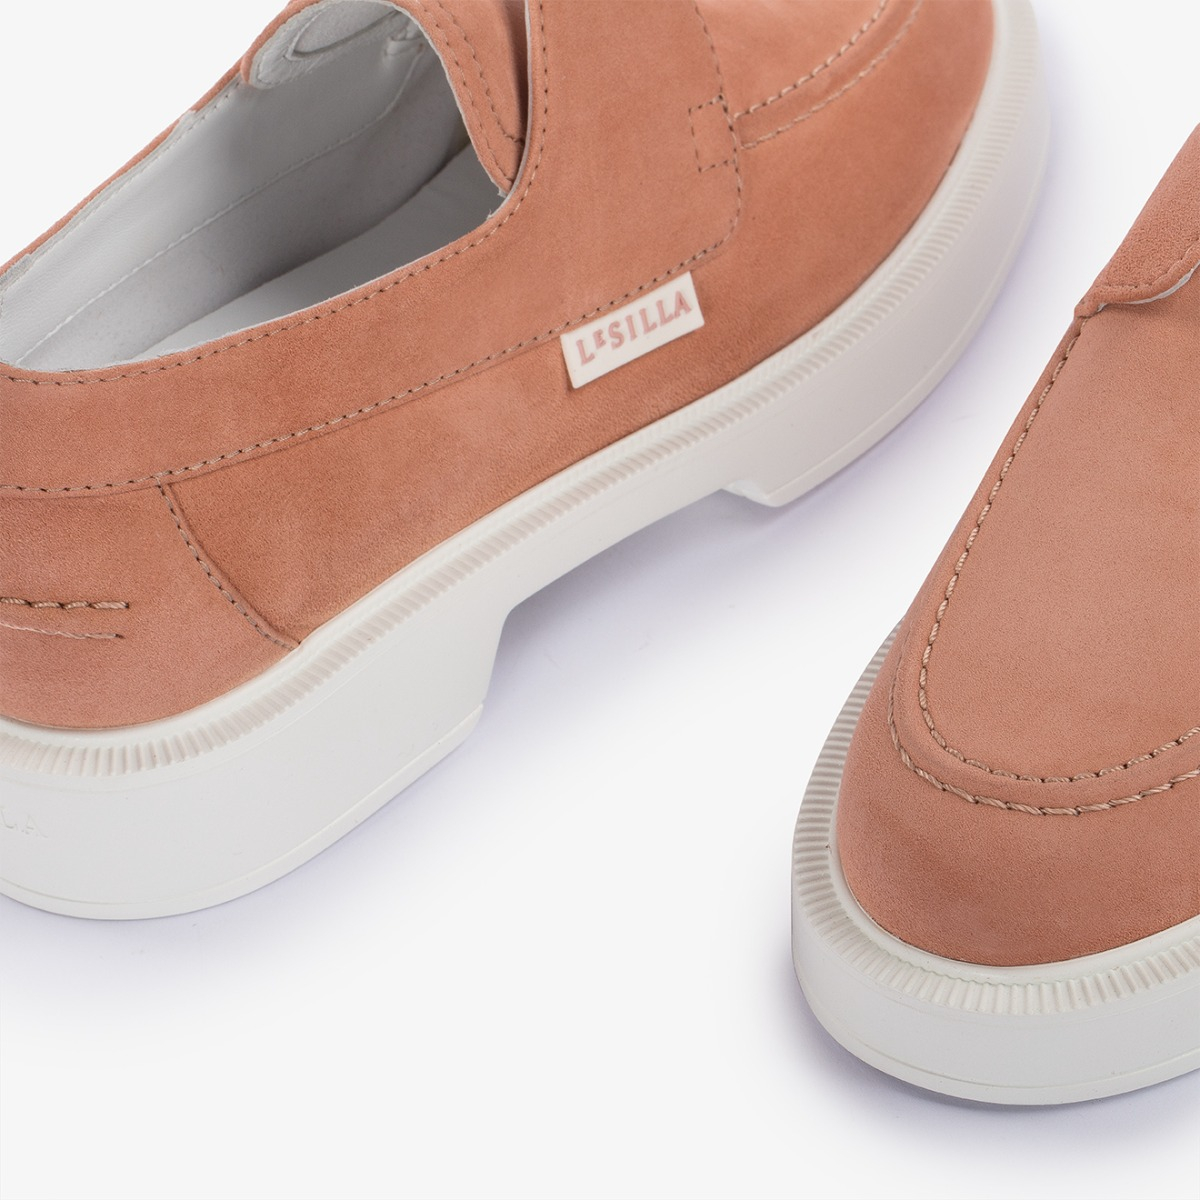 MOCASSIN YACHT - Le Silla | Official Online Store